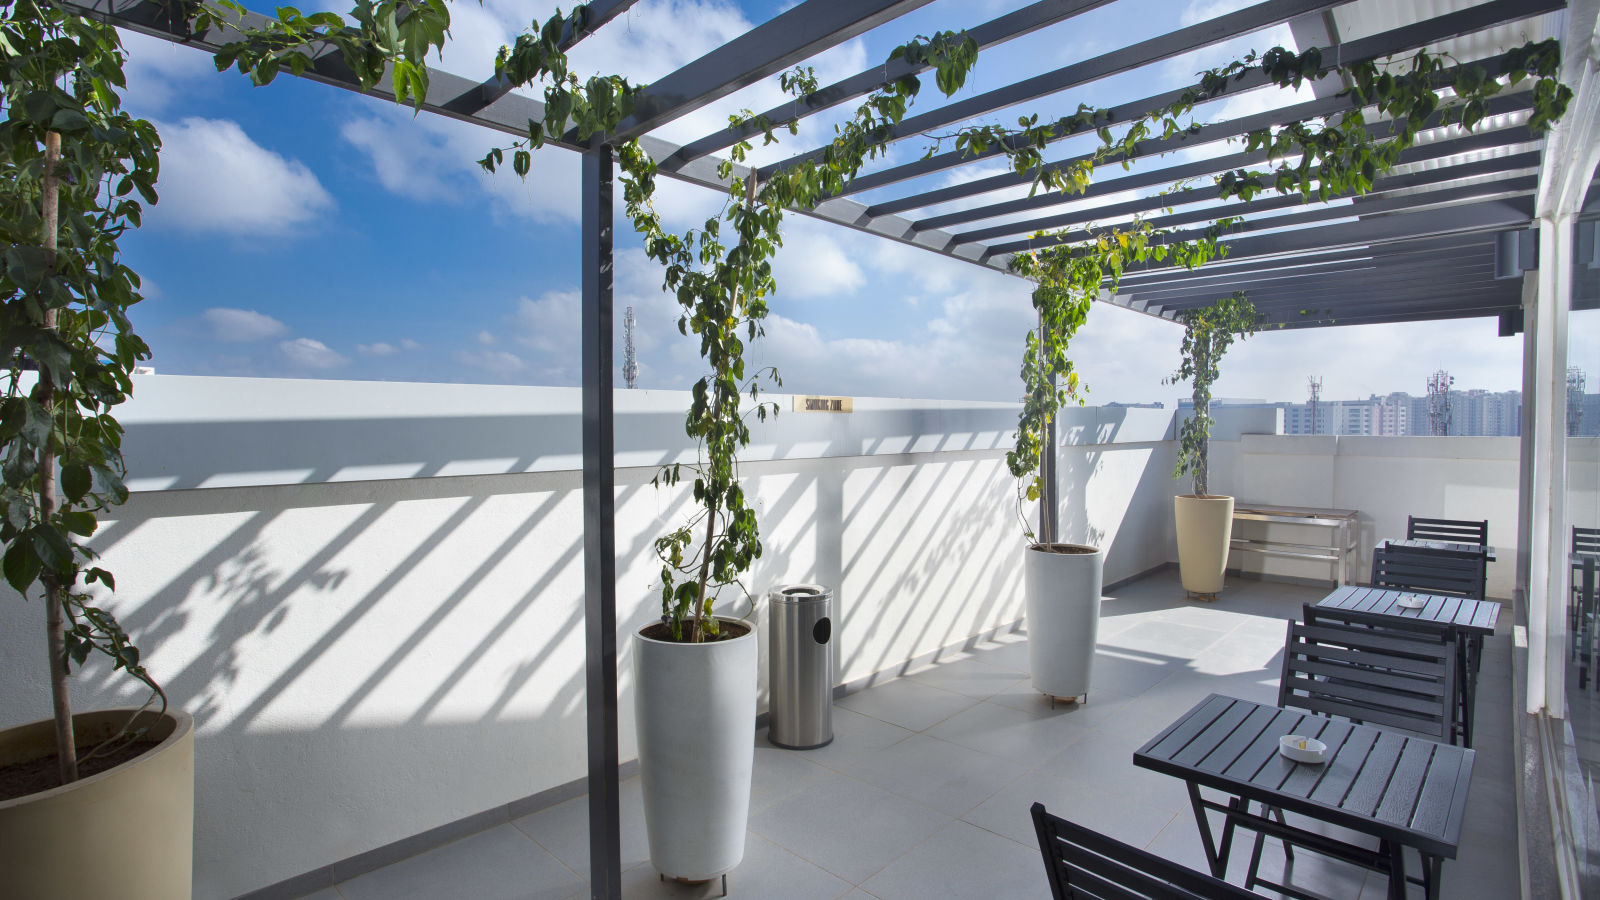 A rooftop terrace with a pergola, climbing plants and seating area against an urban backdrop - De Venetian by TGI, Brookefield